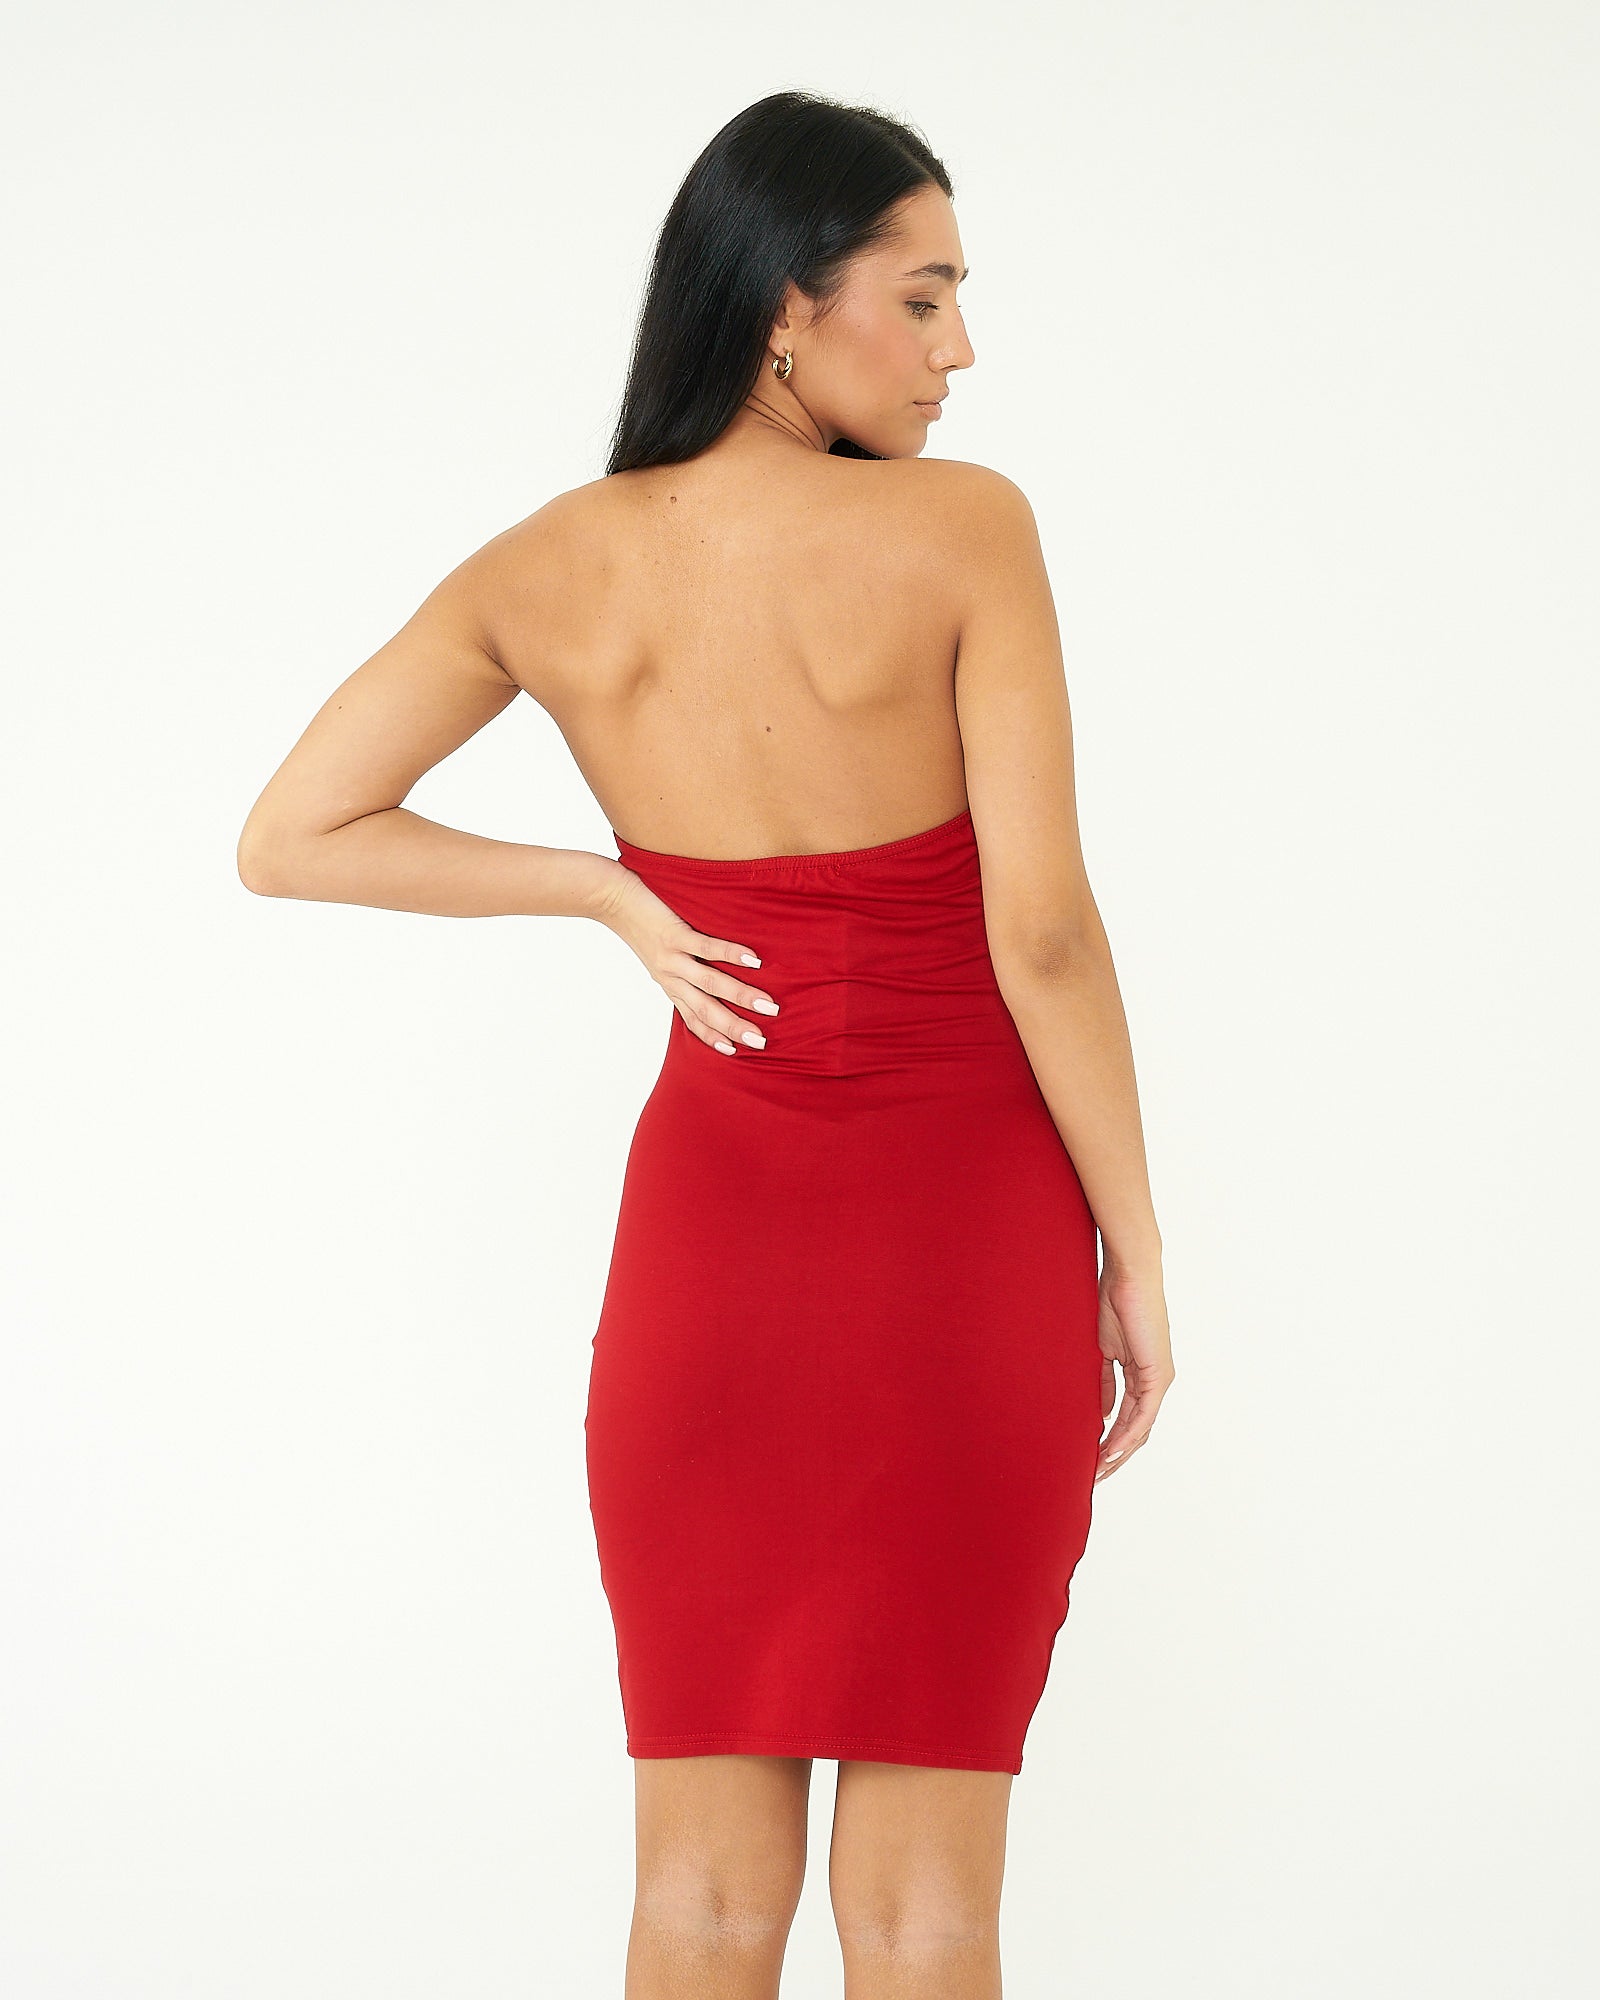 Hoogte rietje Verslinden Red Bandeau Bodycon Dress – Young Alive